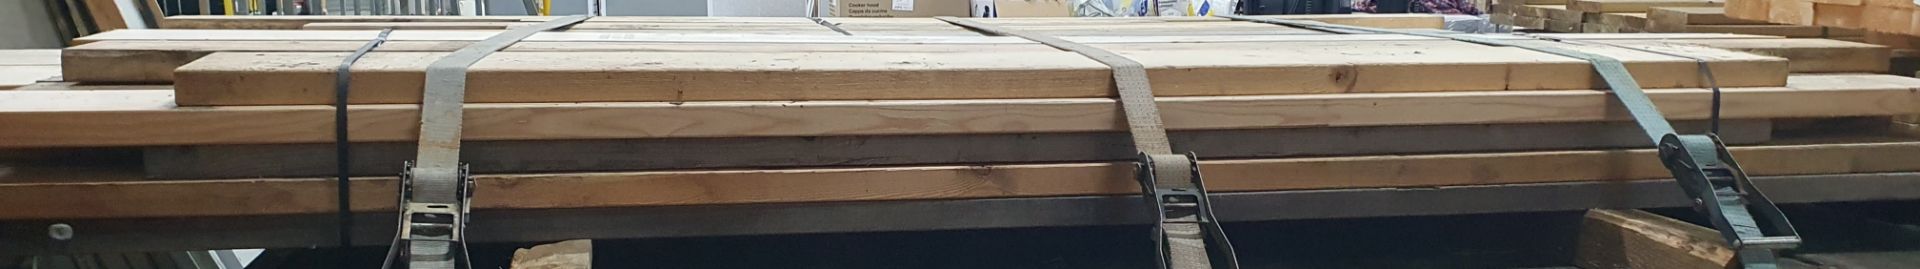 19 x Lengths of Assorted C24 Grade Wood | Includes 11 x (L) 300cm C24 Grade Softwood - Image 2 of 5